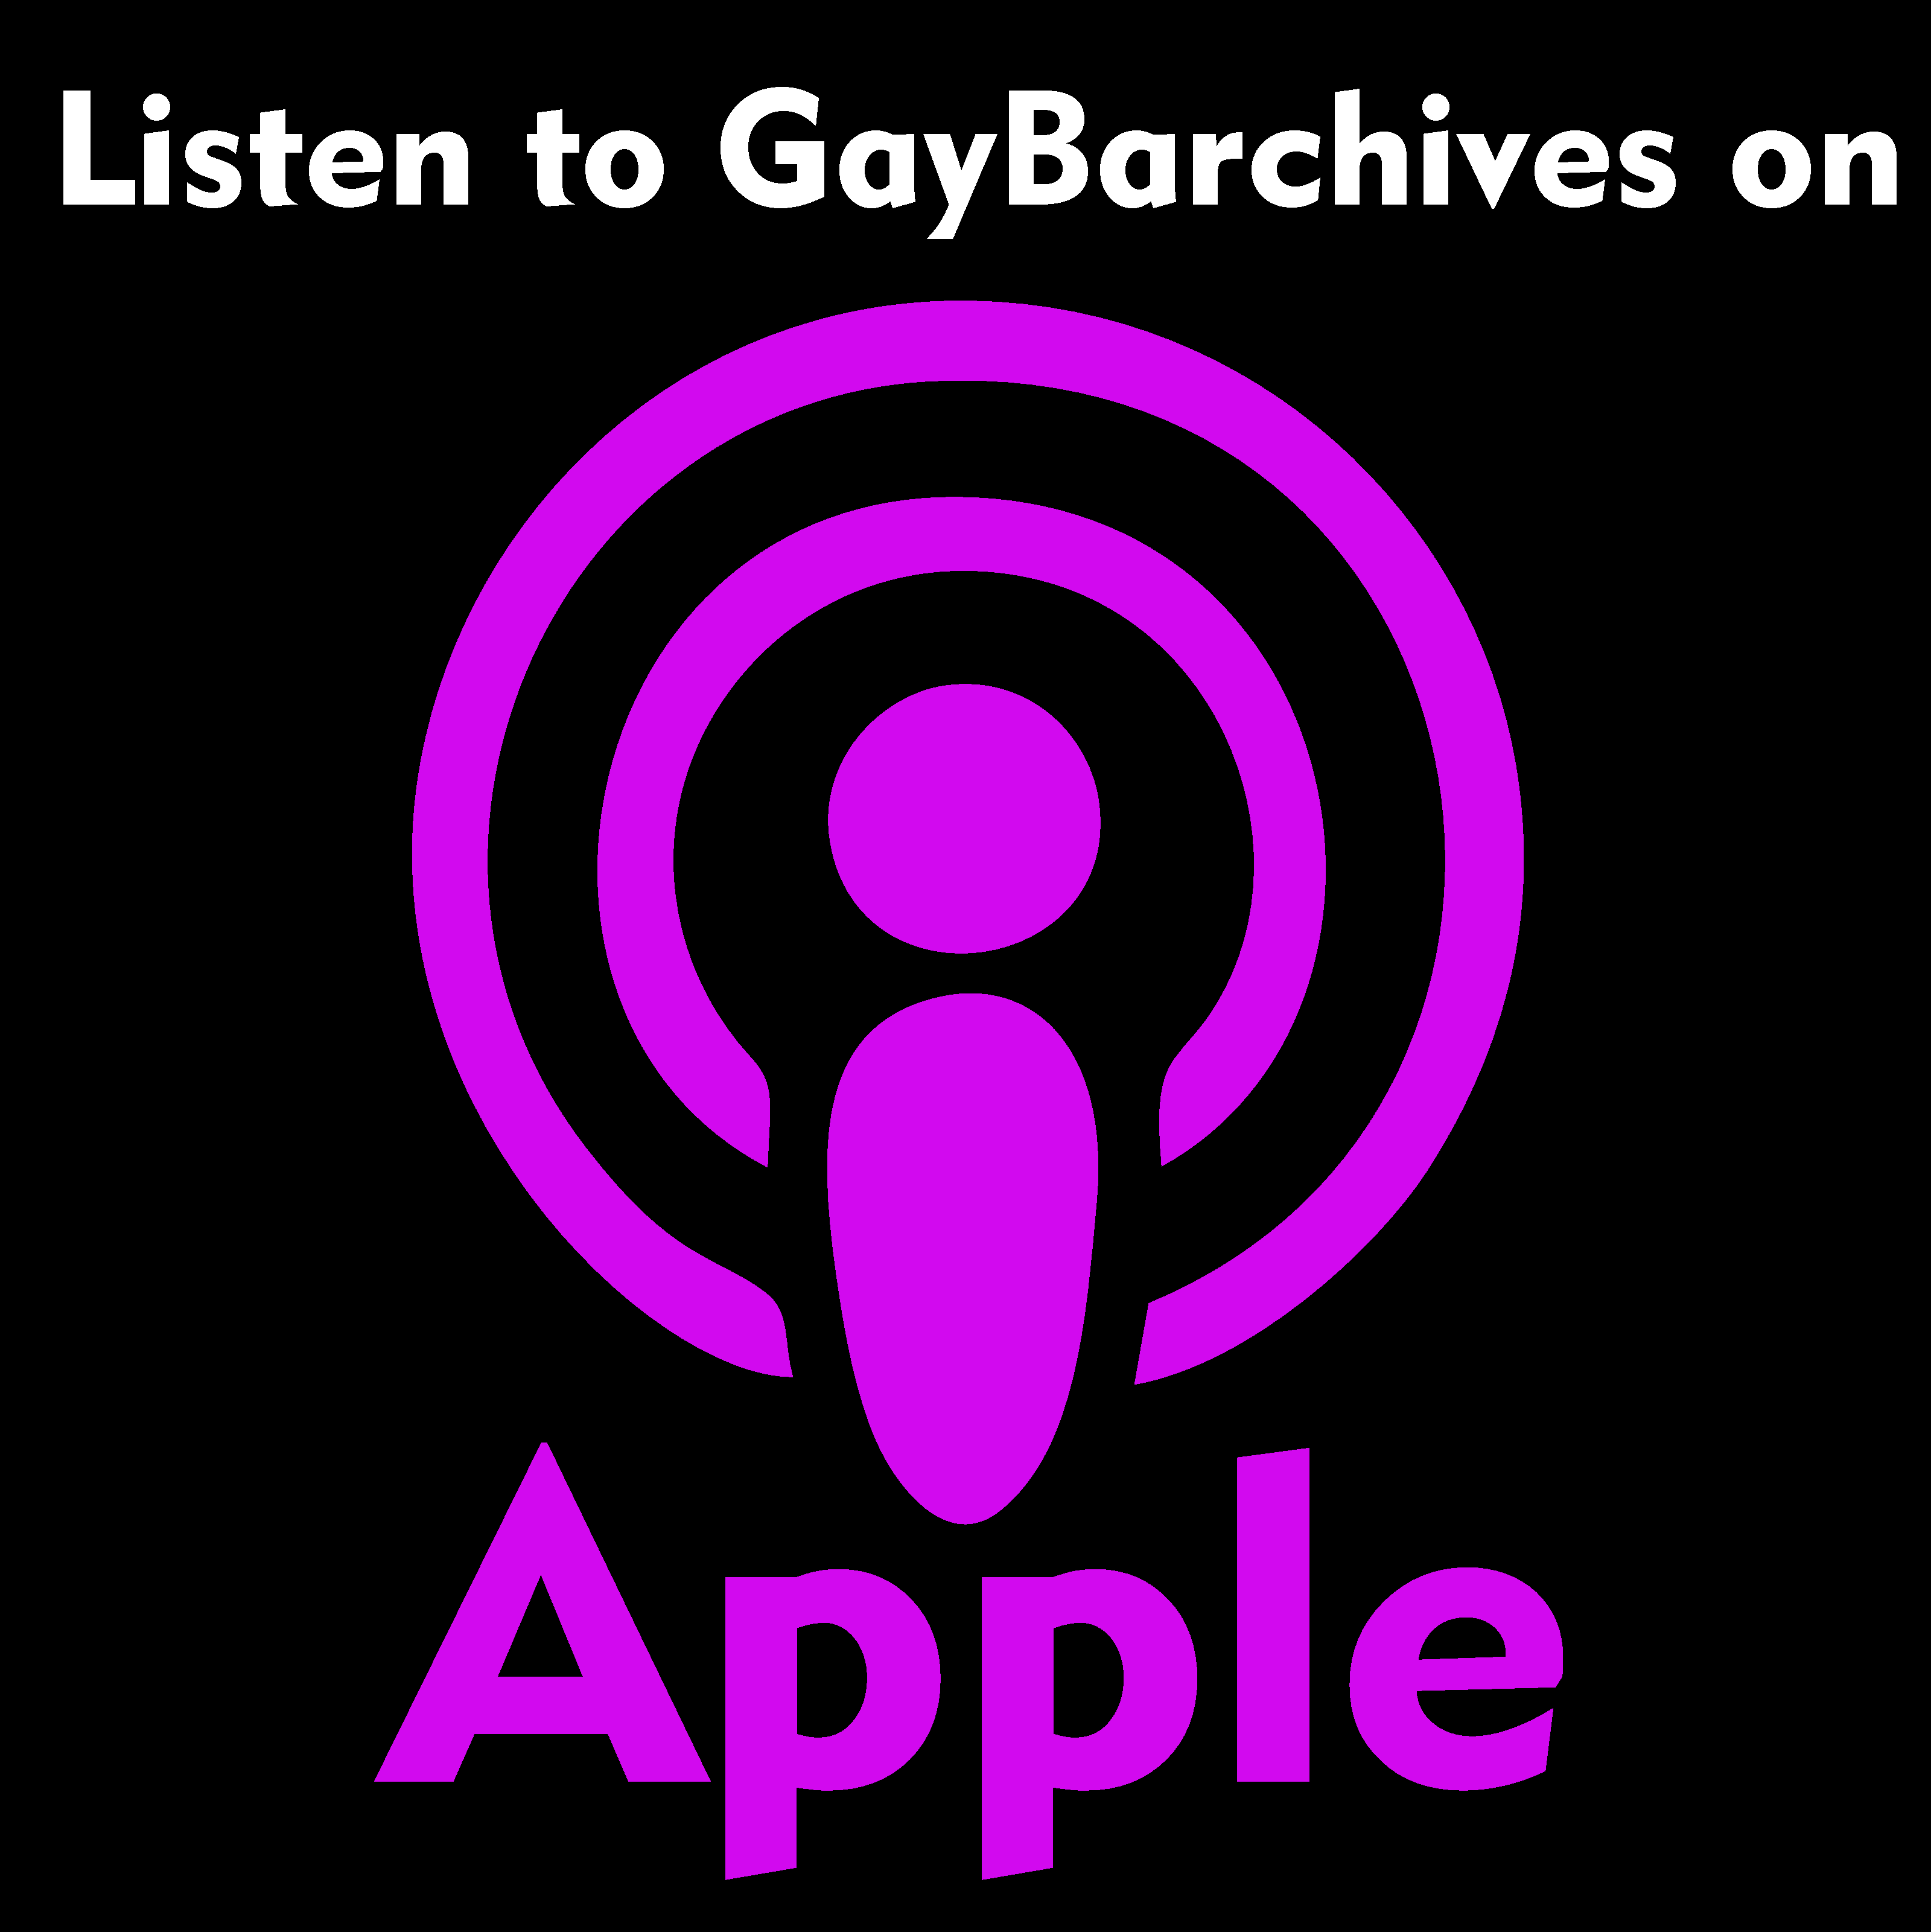 Listen to the GayBarchives podcast on iTunes Apple Podcasts